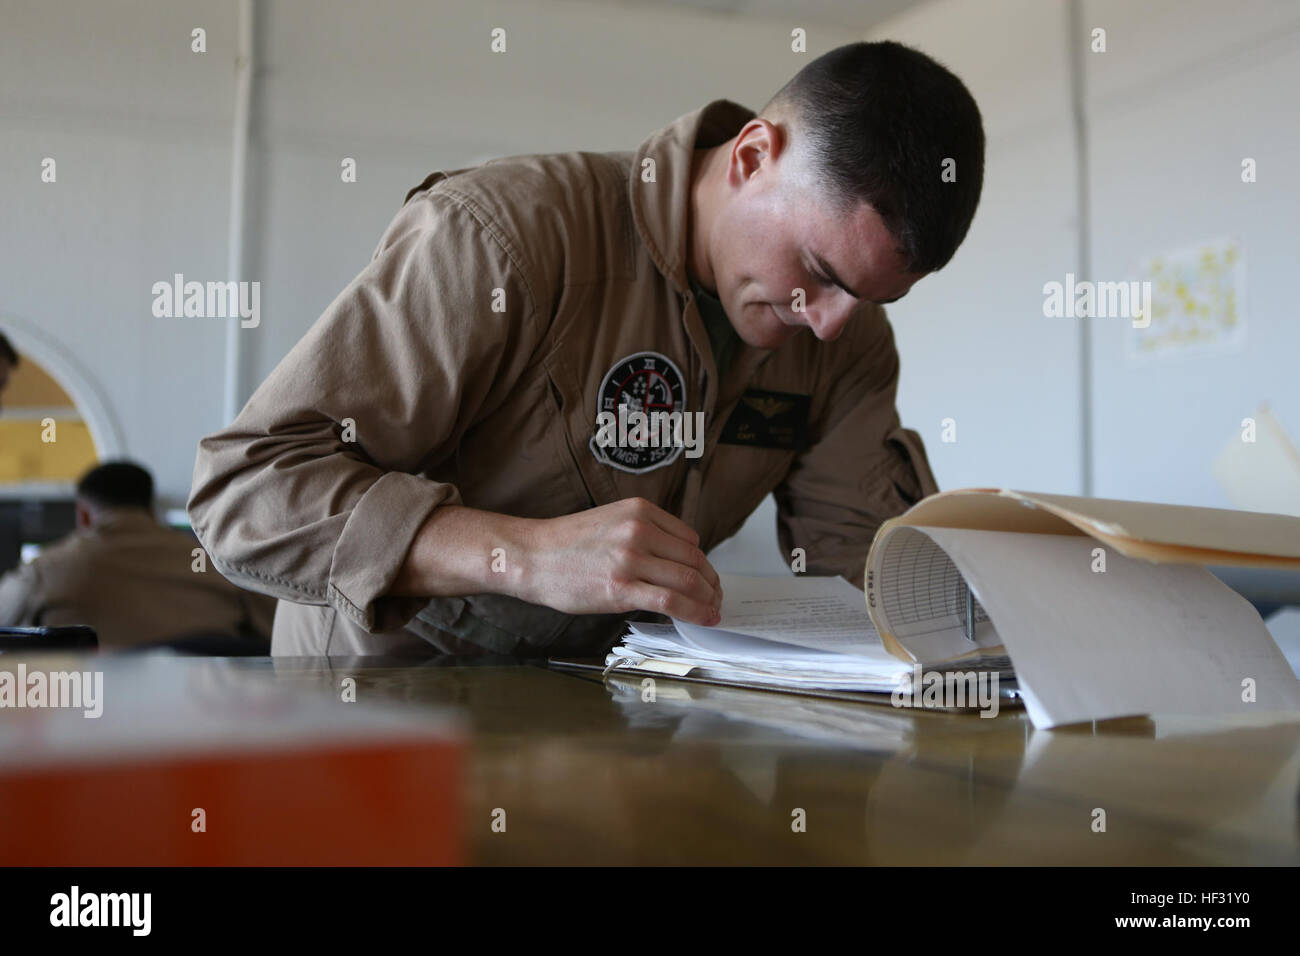 U.S. Marine Corps Capt. John P. Gellinne, a pilot assigned to Marine Aerial Refueler Transport Squadron (VMGR) 252, examines a flight plan in preparation for a Flight In Support of a Deployed Unit (FISDU) at Marine Corps Air Station Cherry Point, N.C., March 8, 2015. The FISDU was conducted to support Marines assigned to Special Purpose Marine Air Ground Task Force conducting operations in foreign countries. (U.S. Marine Corps photo by Lance Cpl. Koby I. Saunders/Released) VMGR-252 Flight In Support of A Deployed Unit 150308-M-AF202-010 Stock Photo